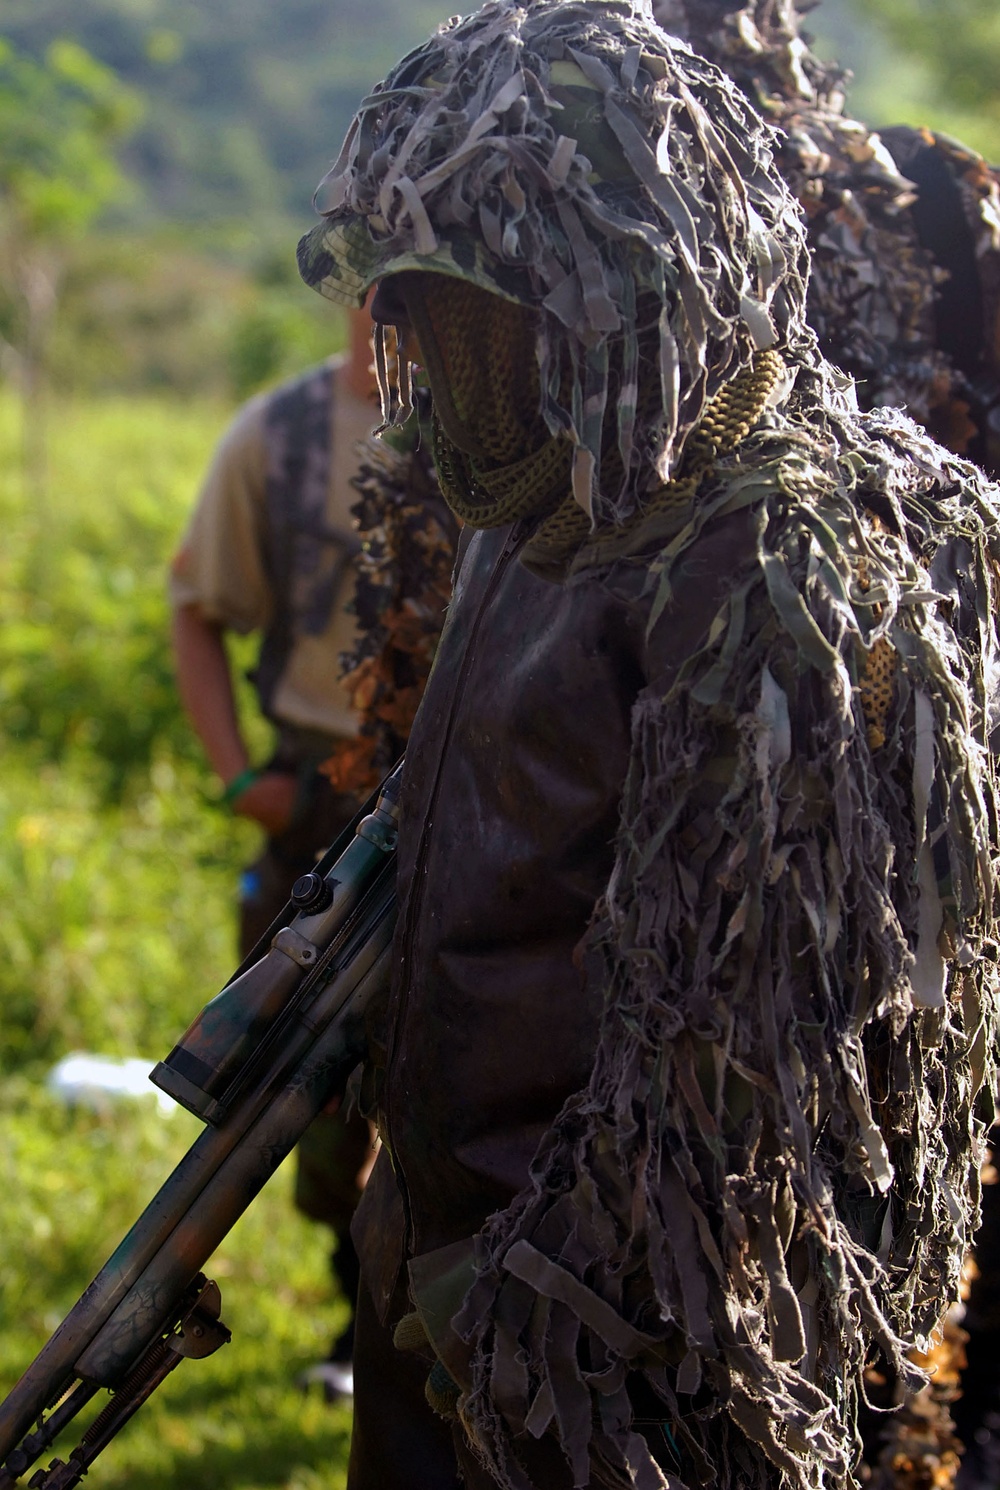 Snipers Compete in Sniper Stalking Event